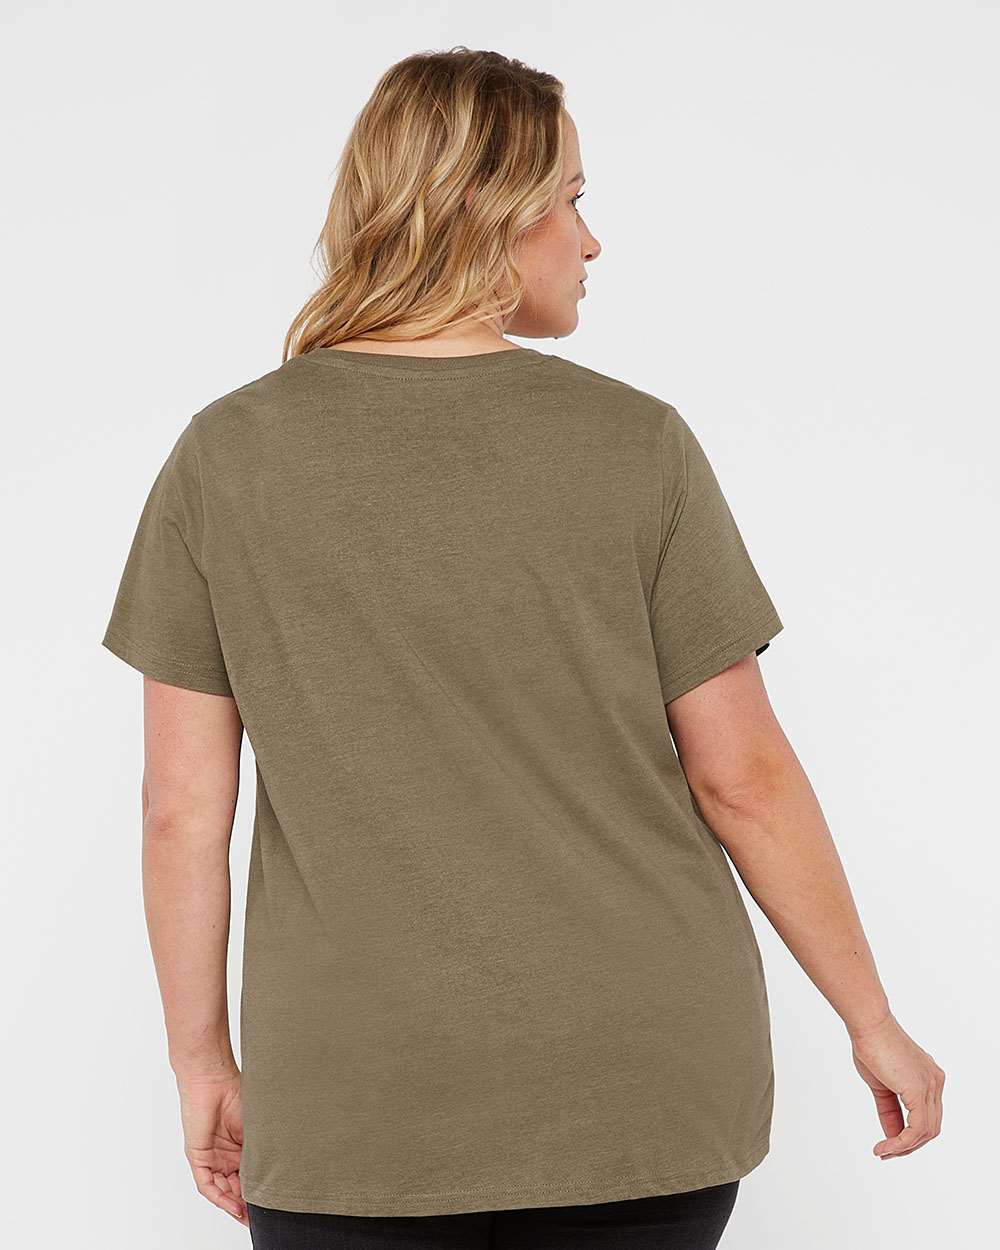 Ladies Curvy - Crew Neck -- Fine Jersey T-shirt --  Vintage Military Green Color